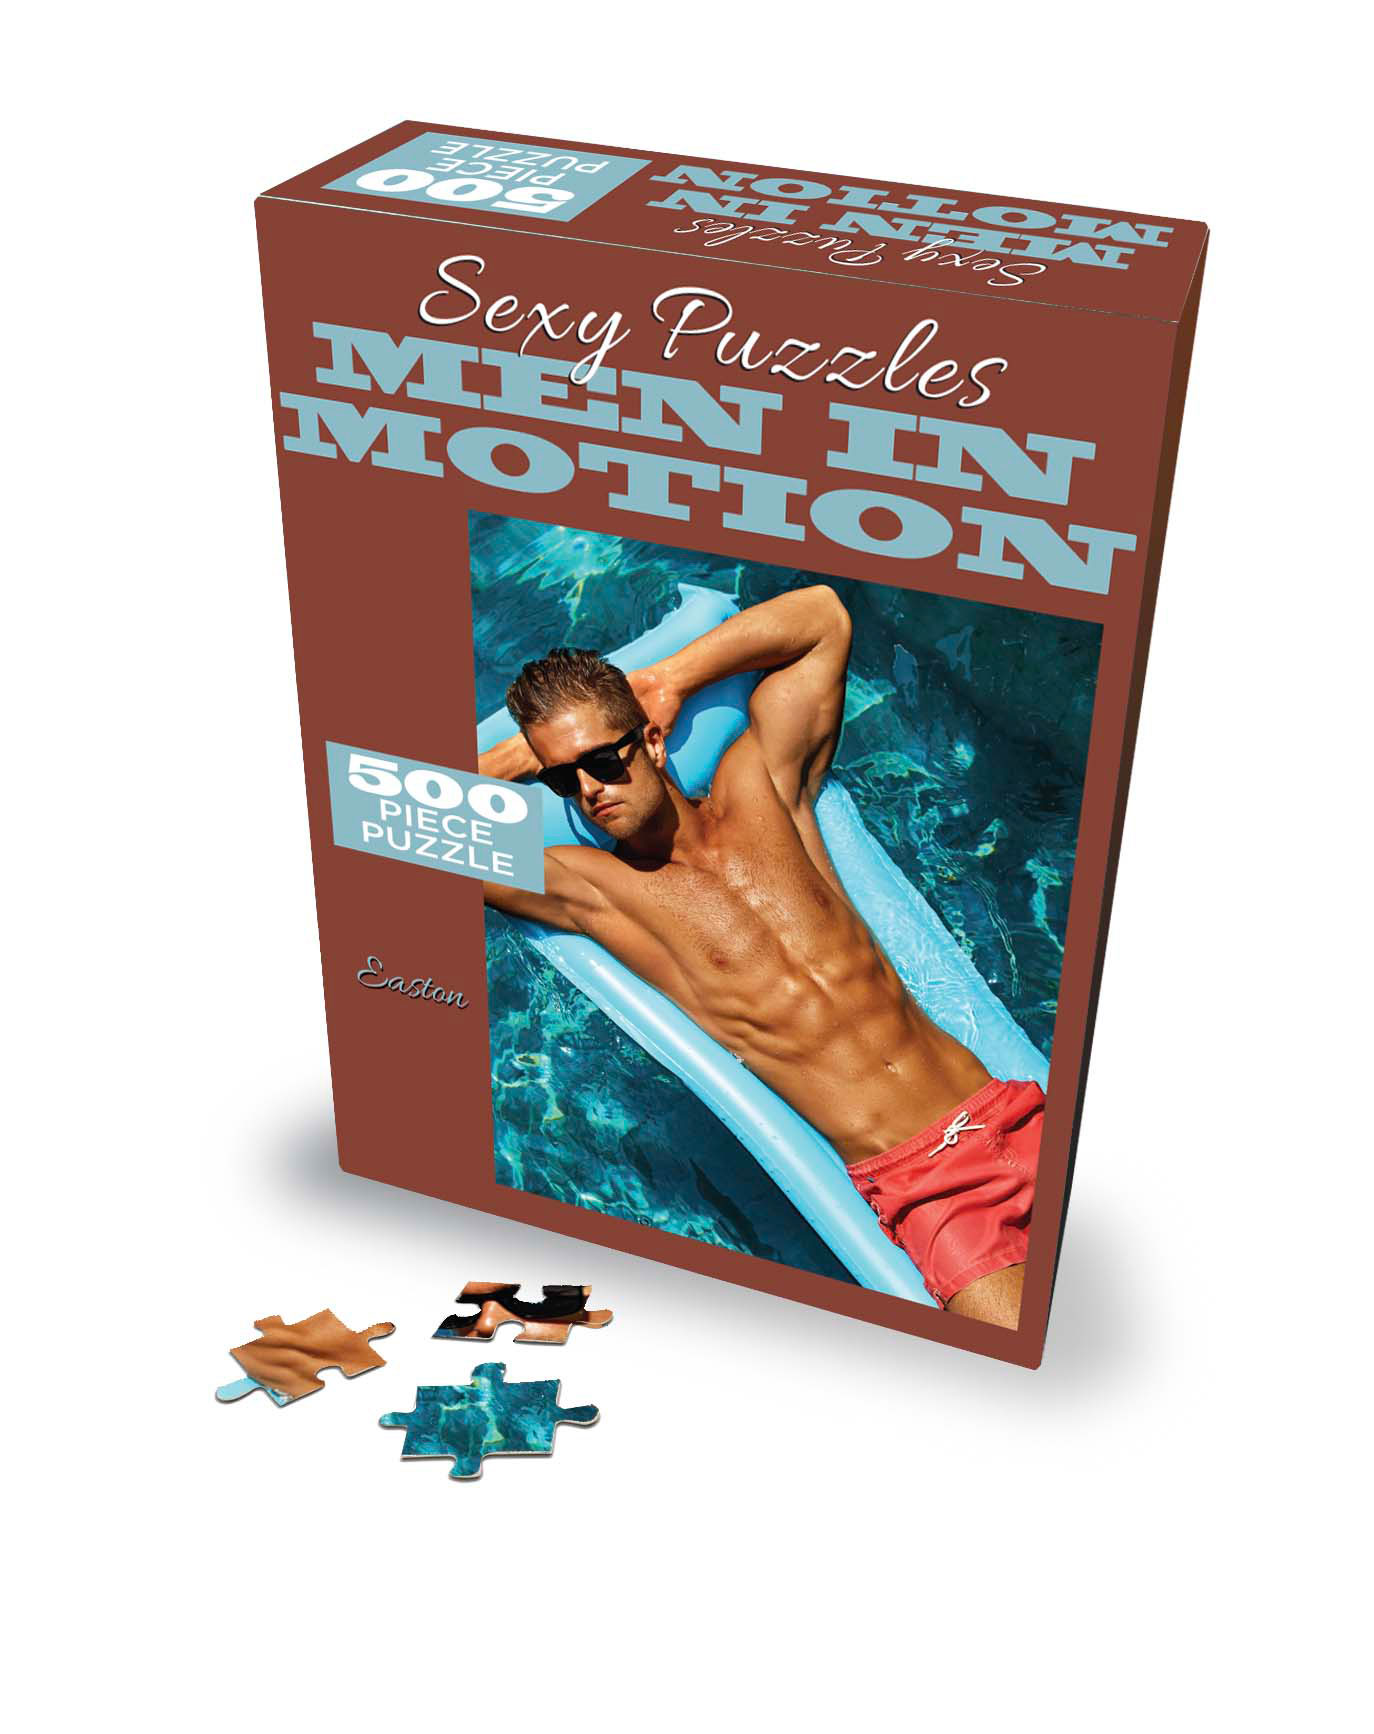 Sexy Puzzles - Men in Motion - Easton